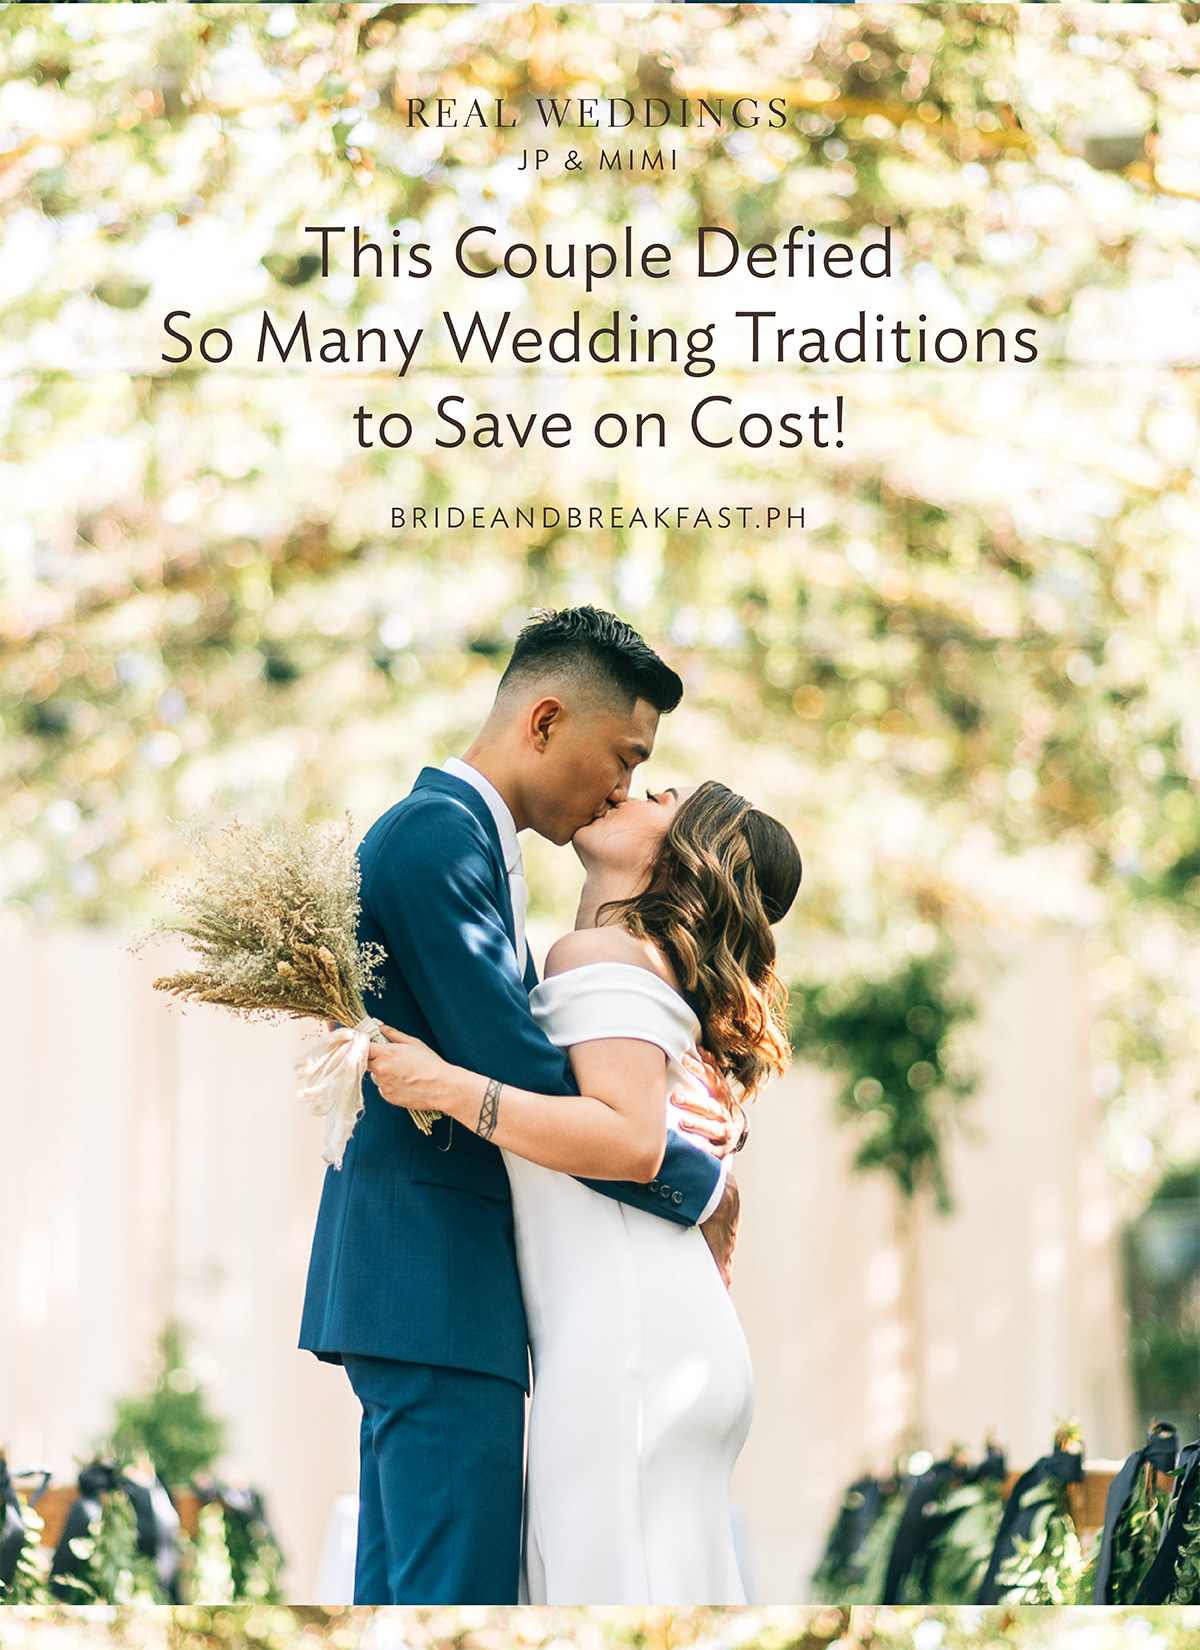 This Couple Defied So Many Wedding Traditions to Save on Cost!